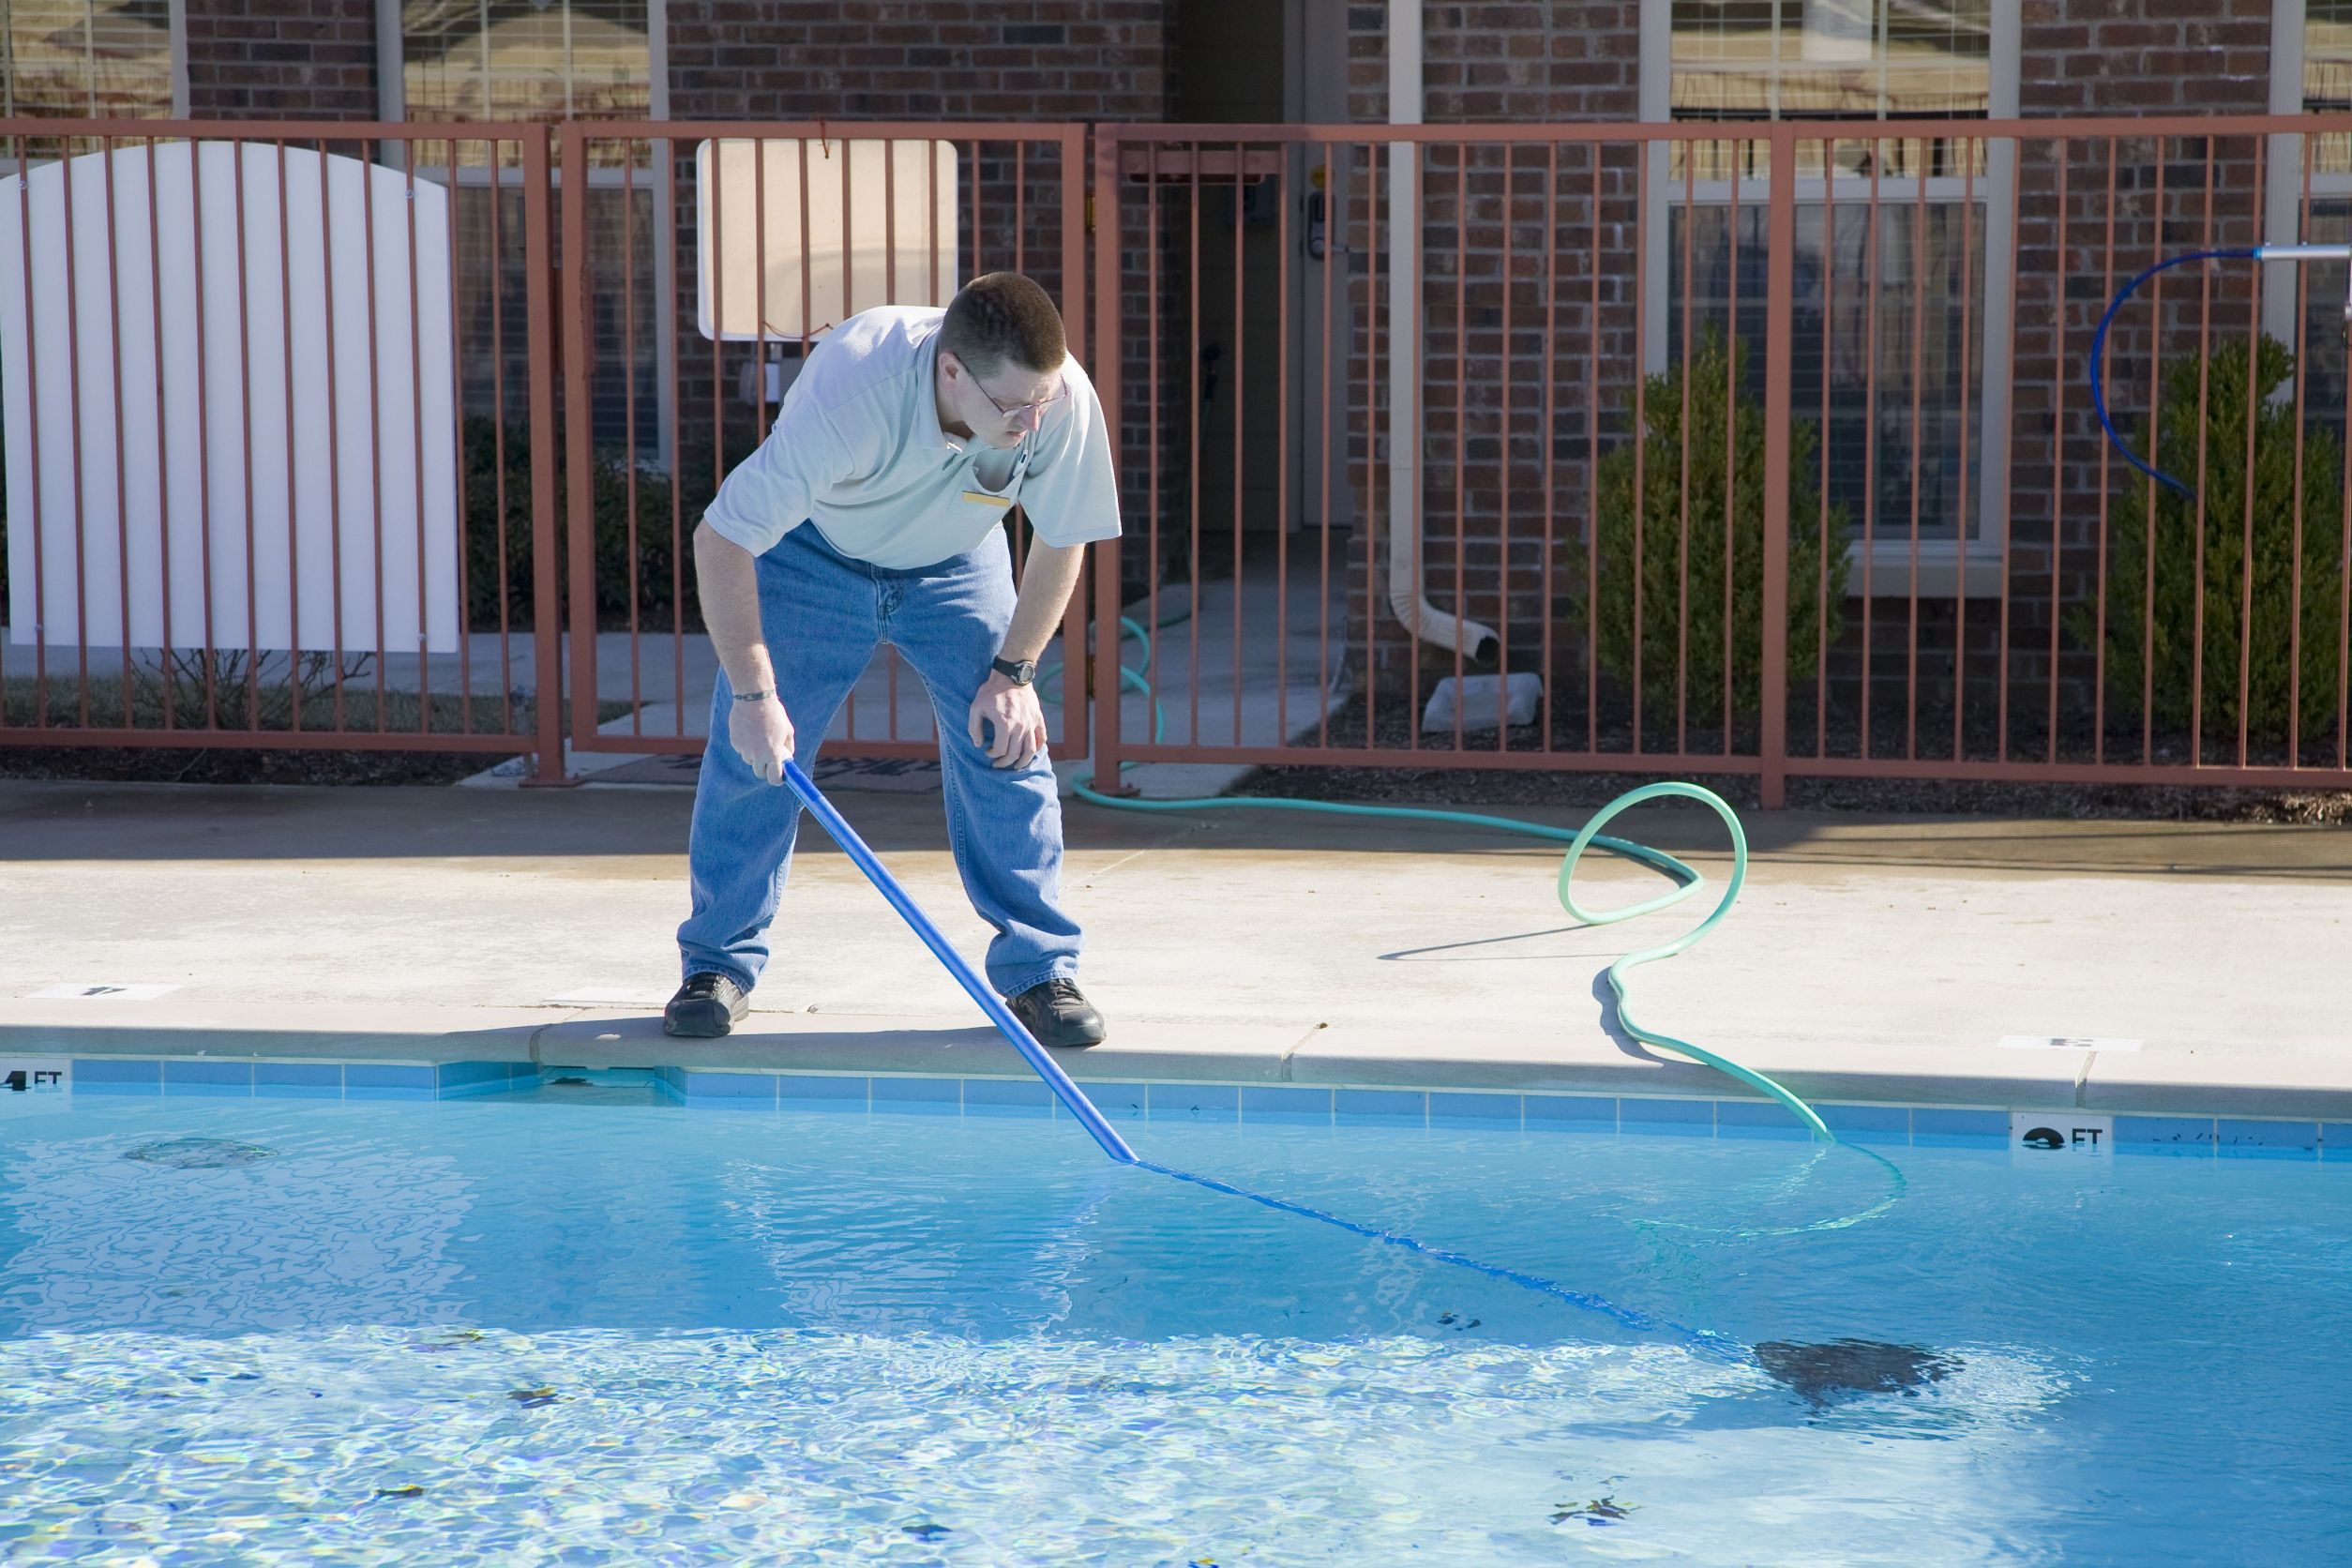 Balancing of Pool Chemicals in Houston as Part of a Service Contract or Routine Do-It-Yourself Project